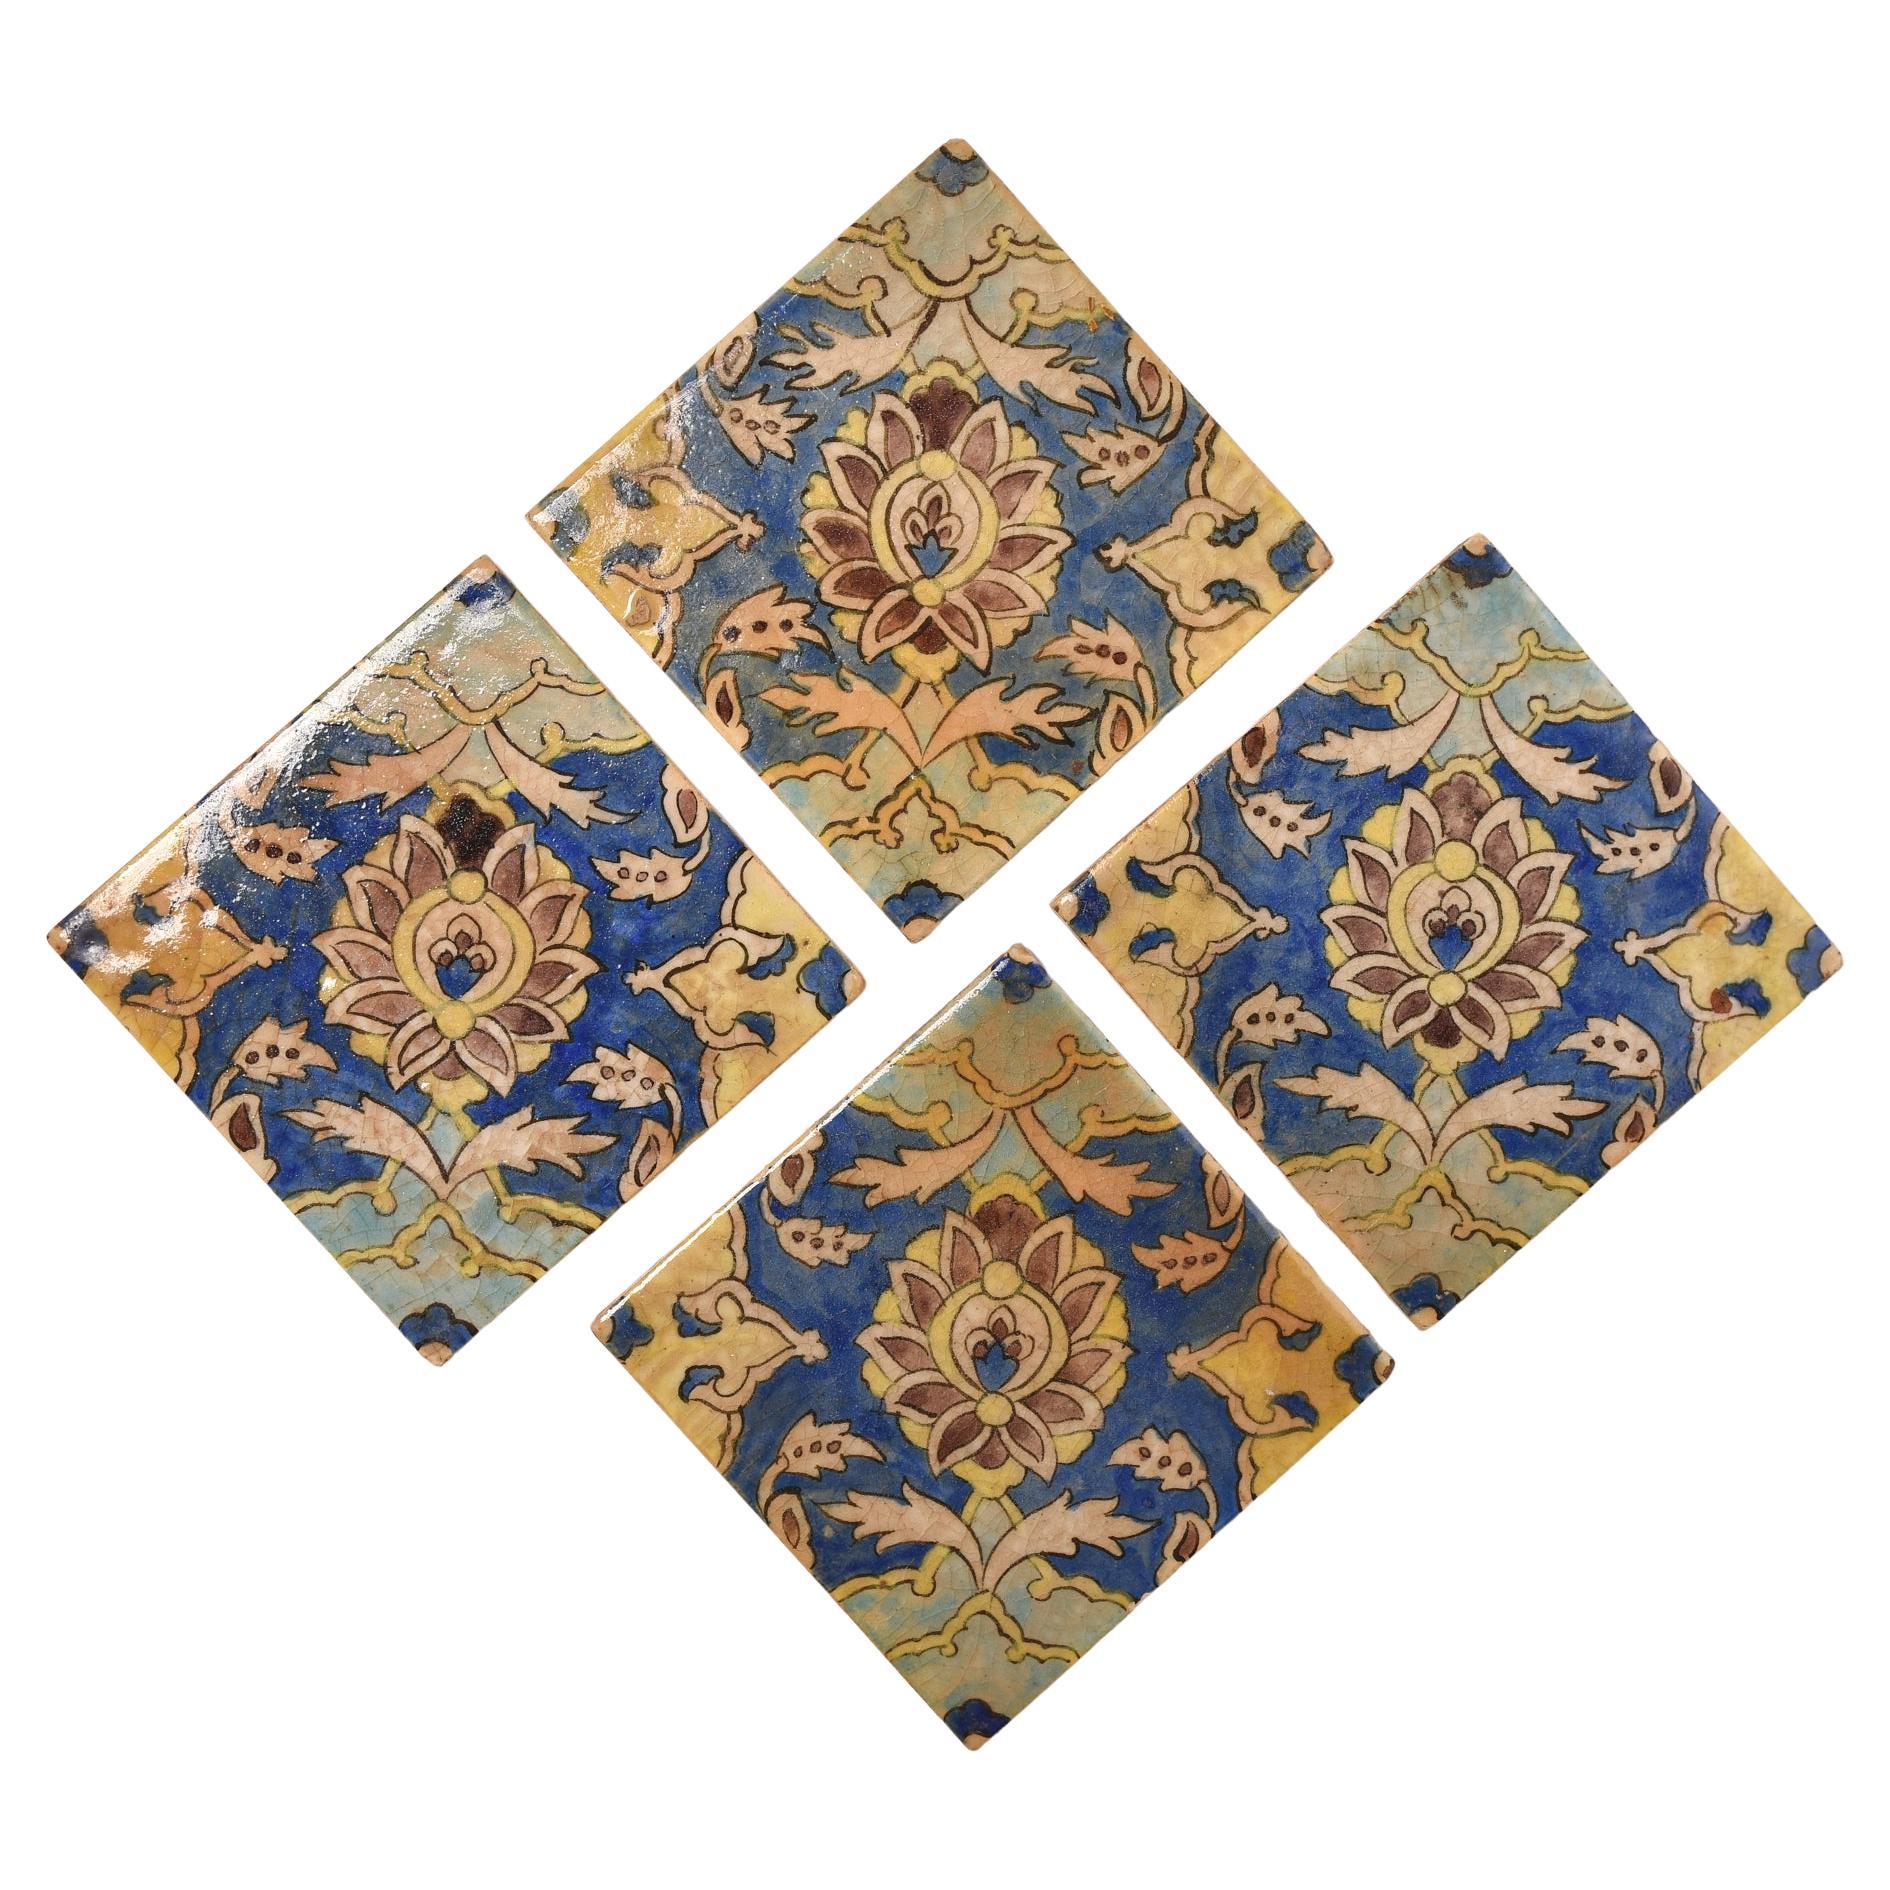 Azerbaijani Four Old Painted Tiles For Sale